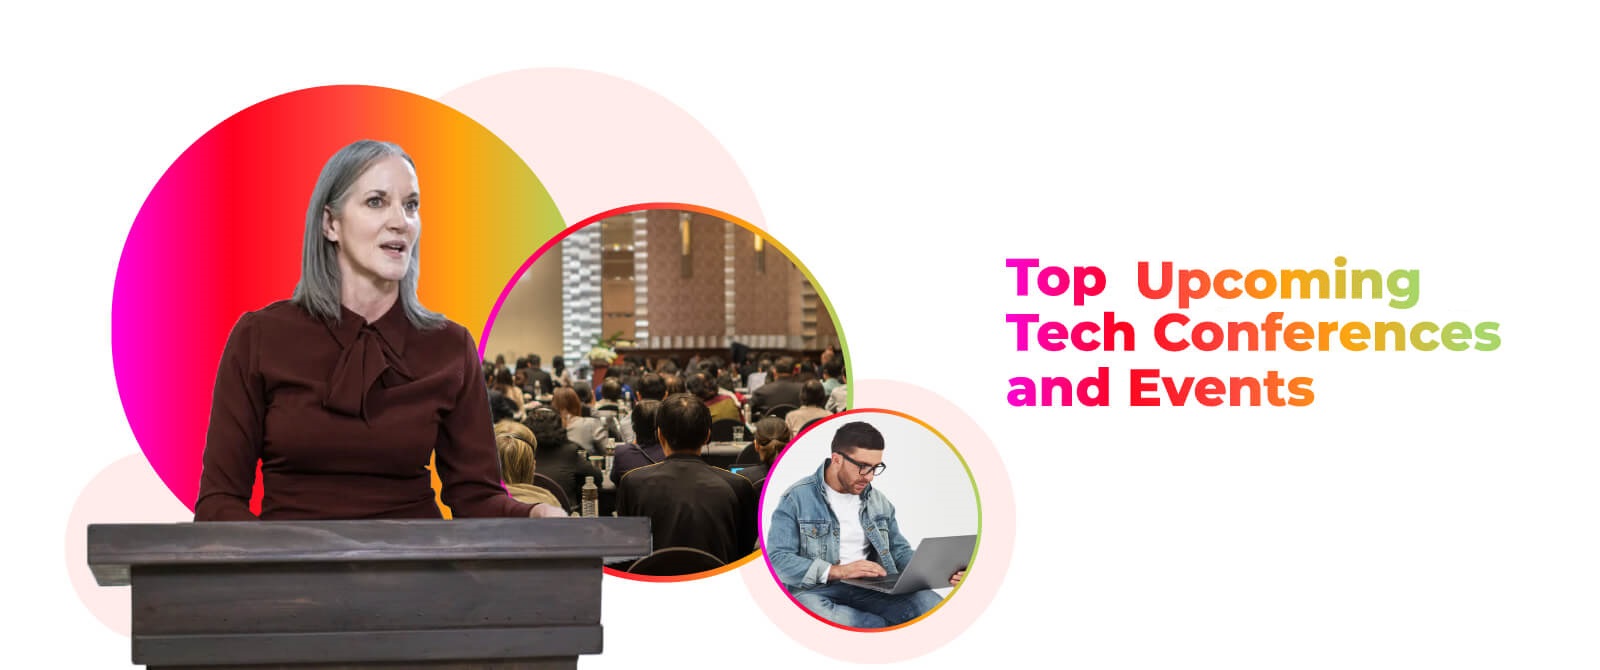 Top 17 Upcoming Tech Conferences and Events in India & UAE